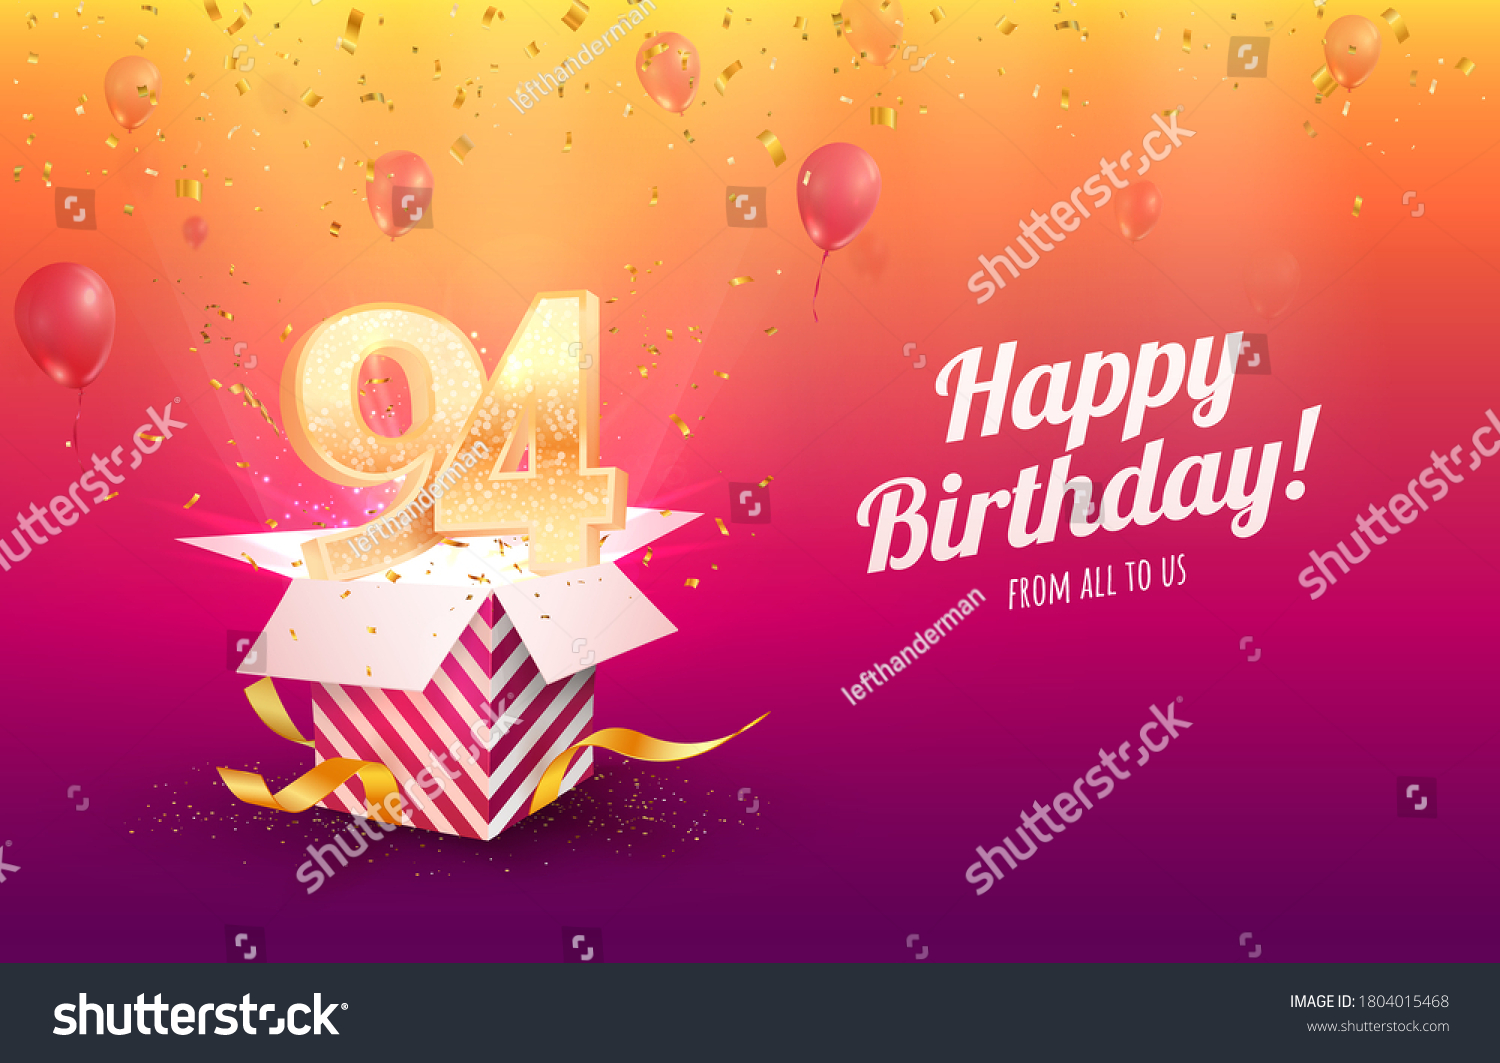 SVG of Celebrating 94th years birthday vector illustration. Ninety-four anniversary celebration background. Adult birth day. Open gift box with flying holiday numbers svg